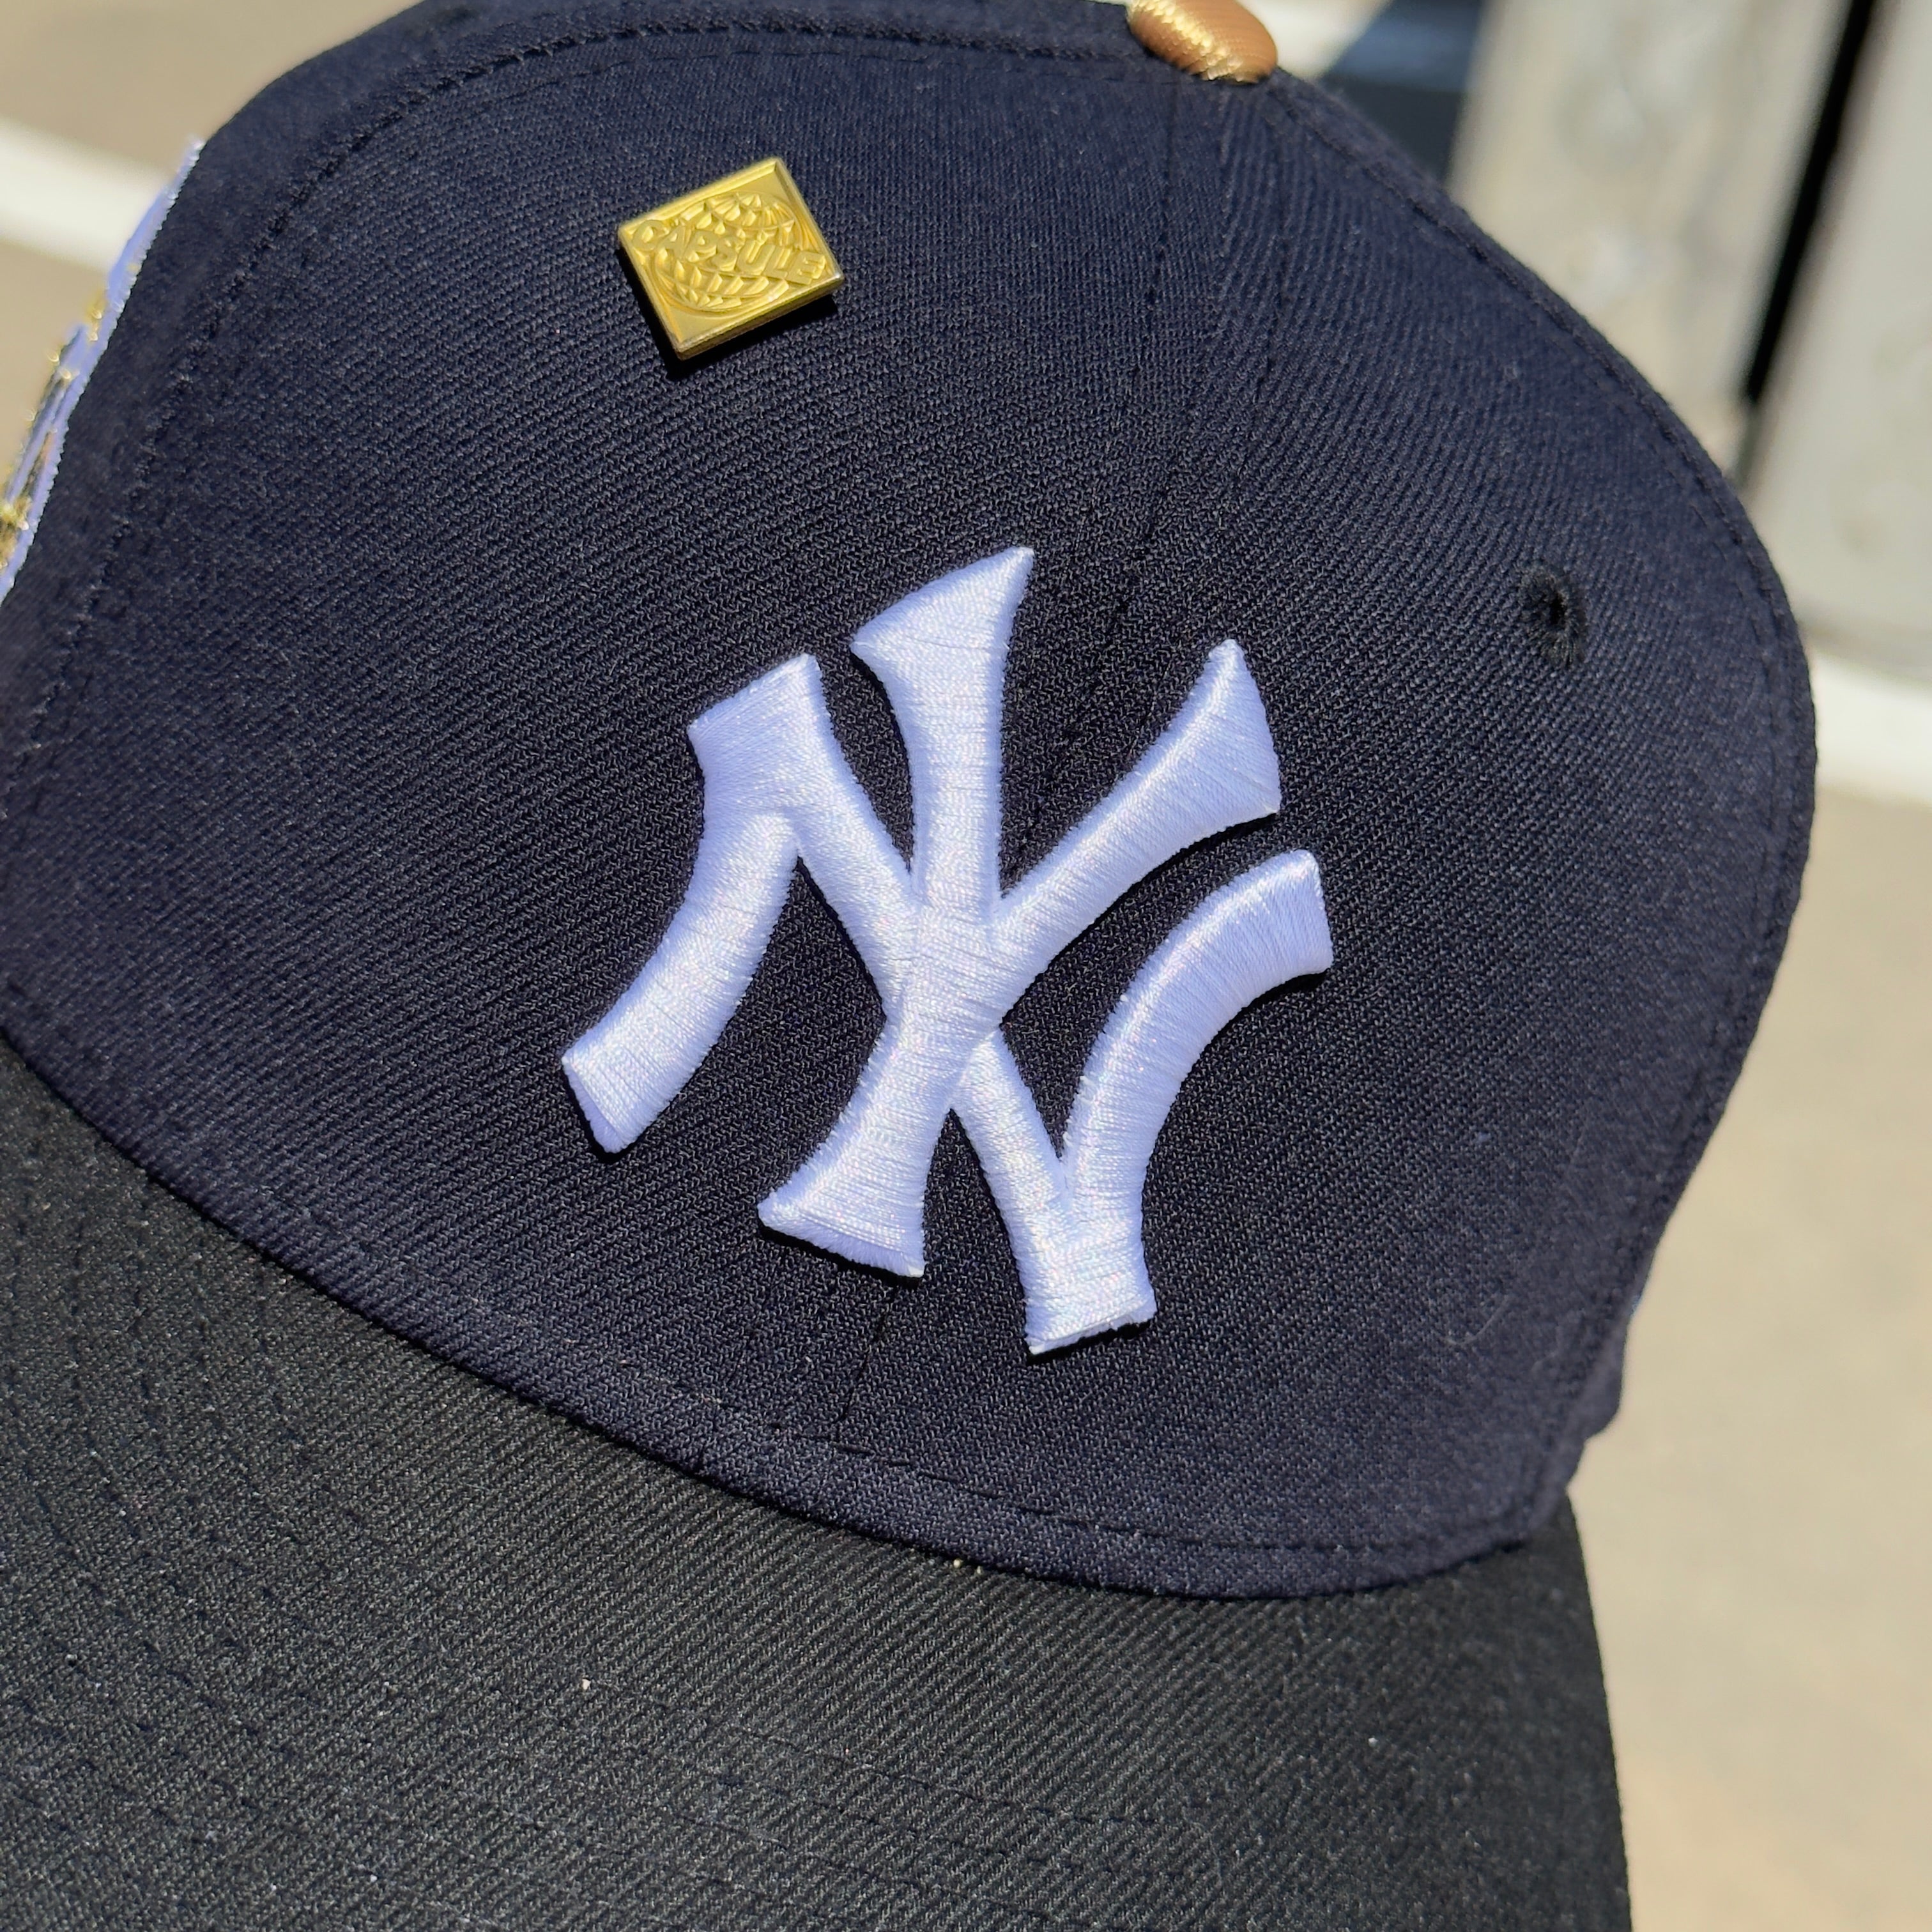 7 1/4 USED Navy New York Yankees Capsule World Series 59fifty New Era Fitted Hat Cap